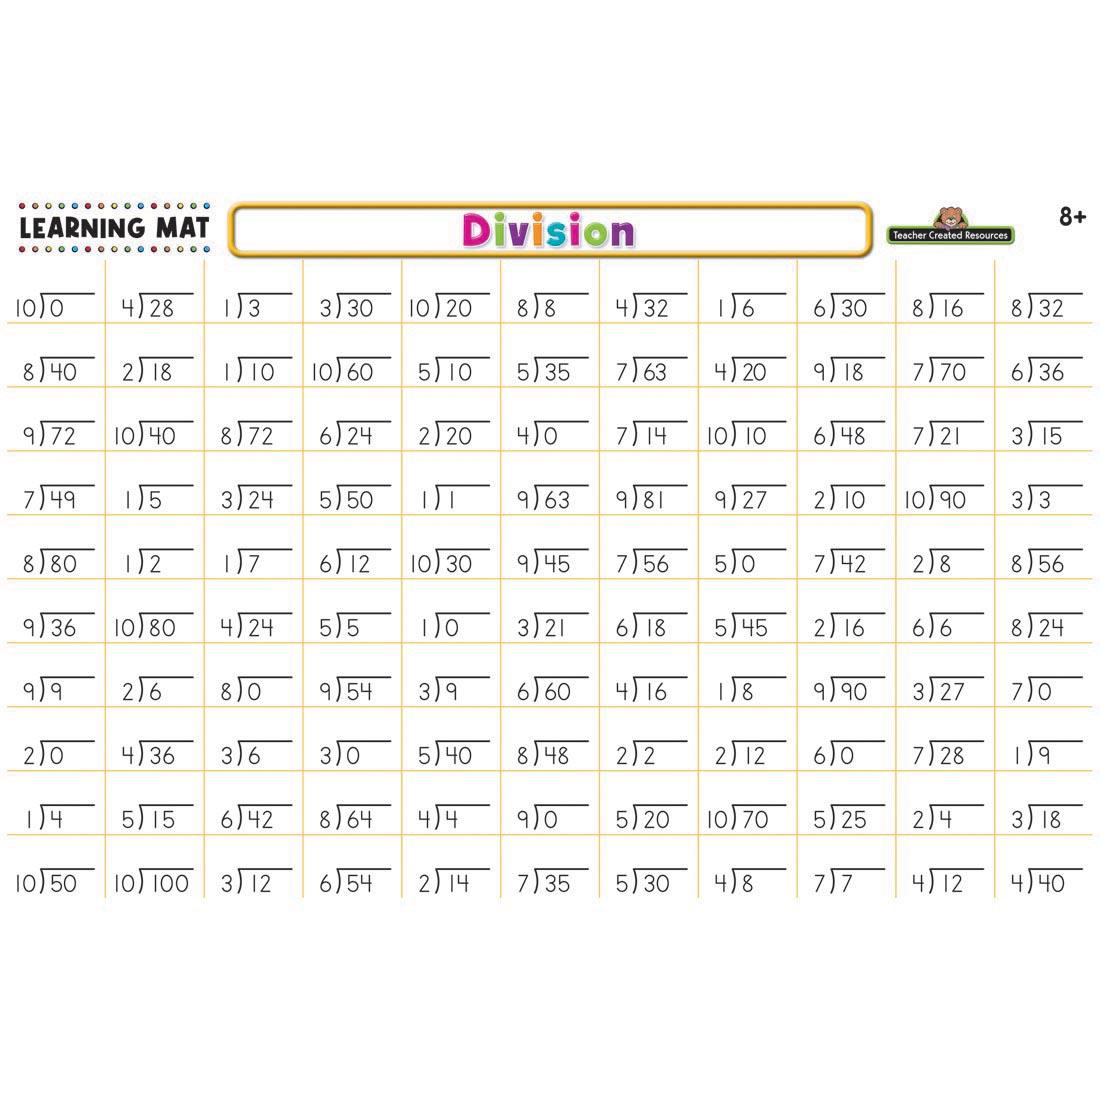 Division Dry Erase Learning Mat